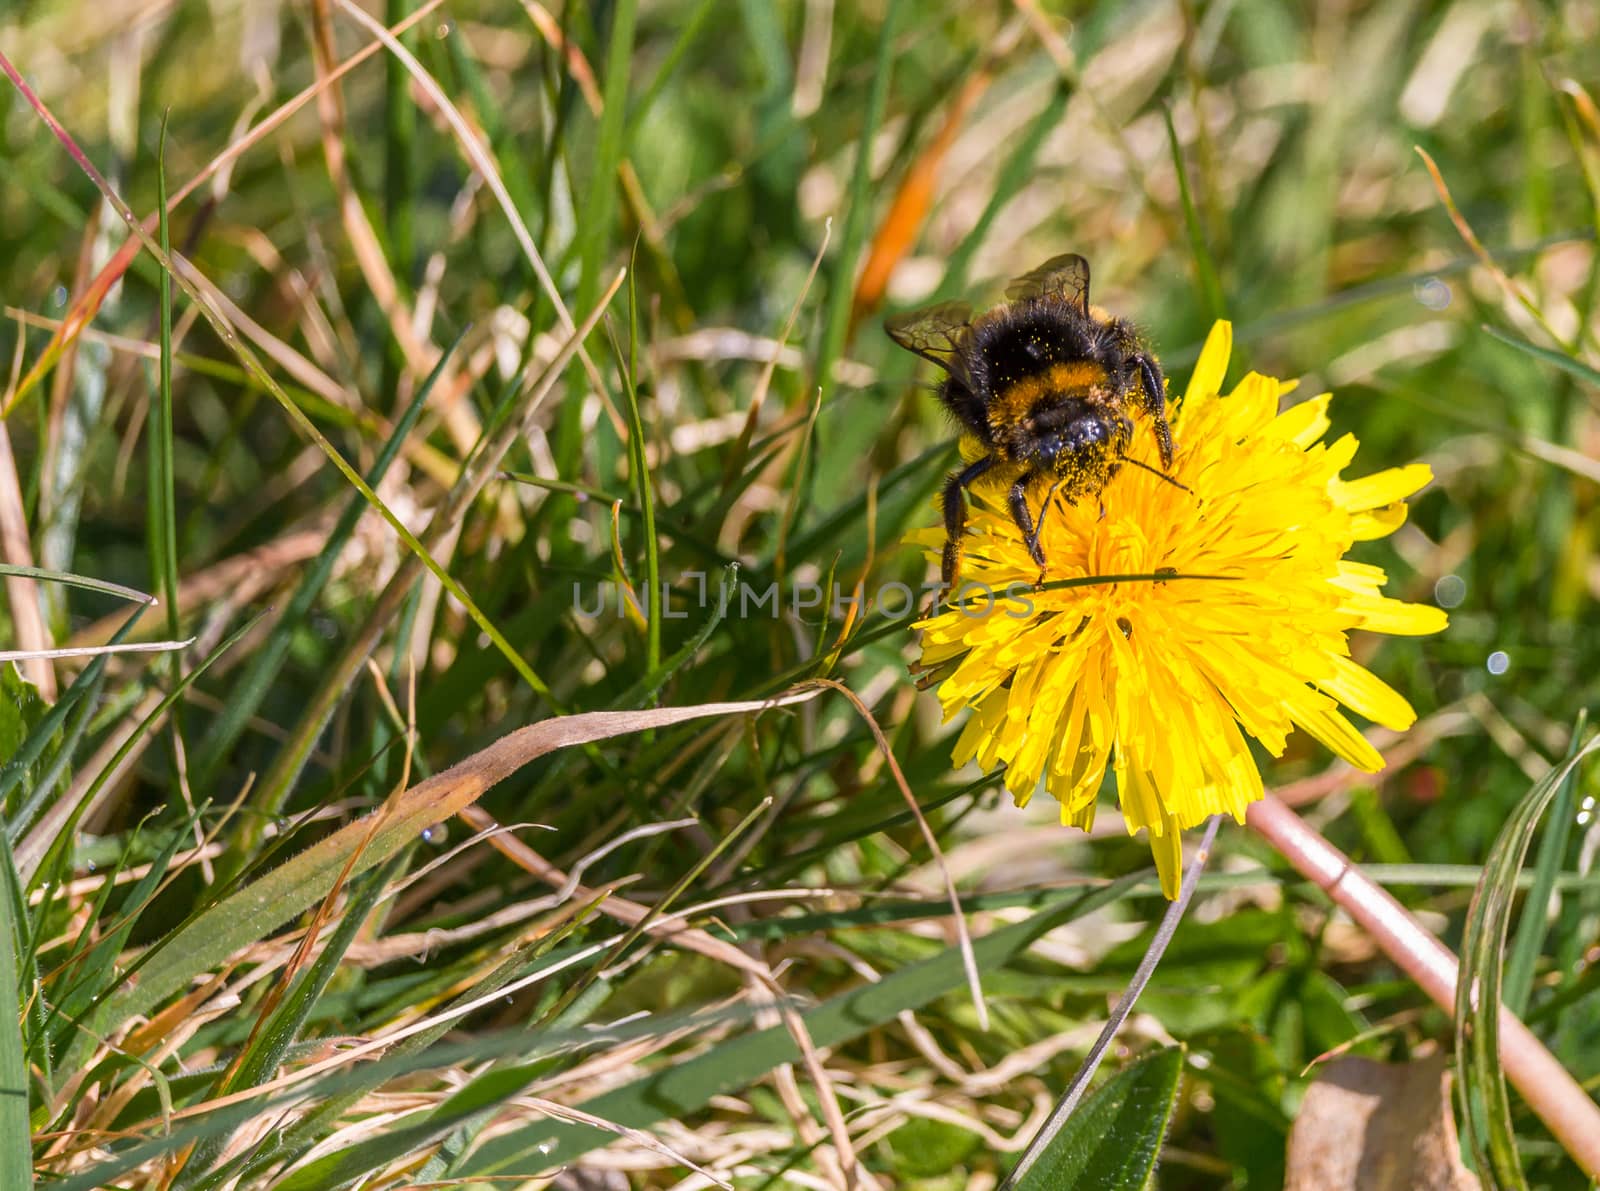 Bumblebee covered in pollen collecting more from a dandelion